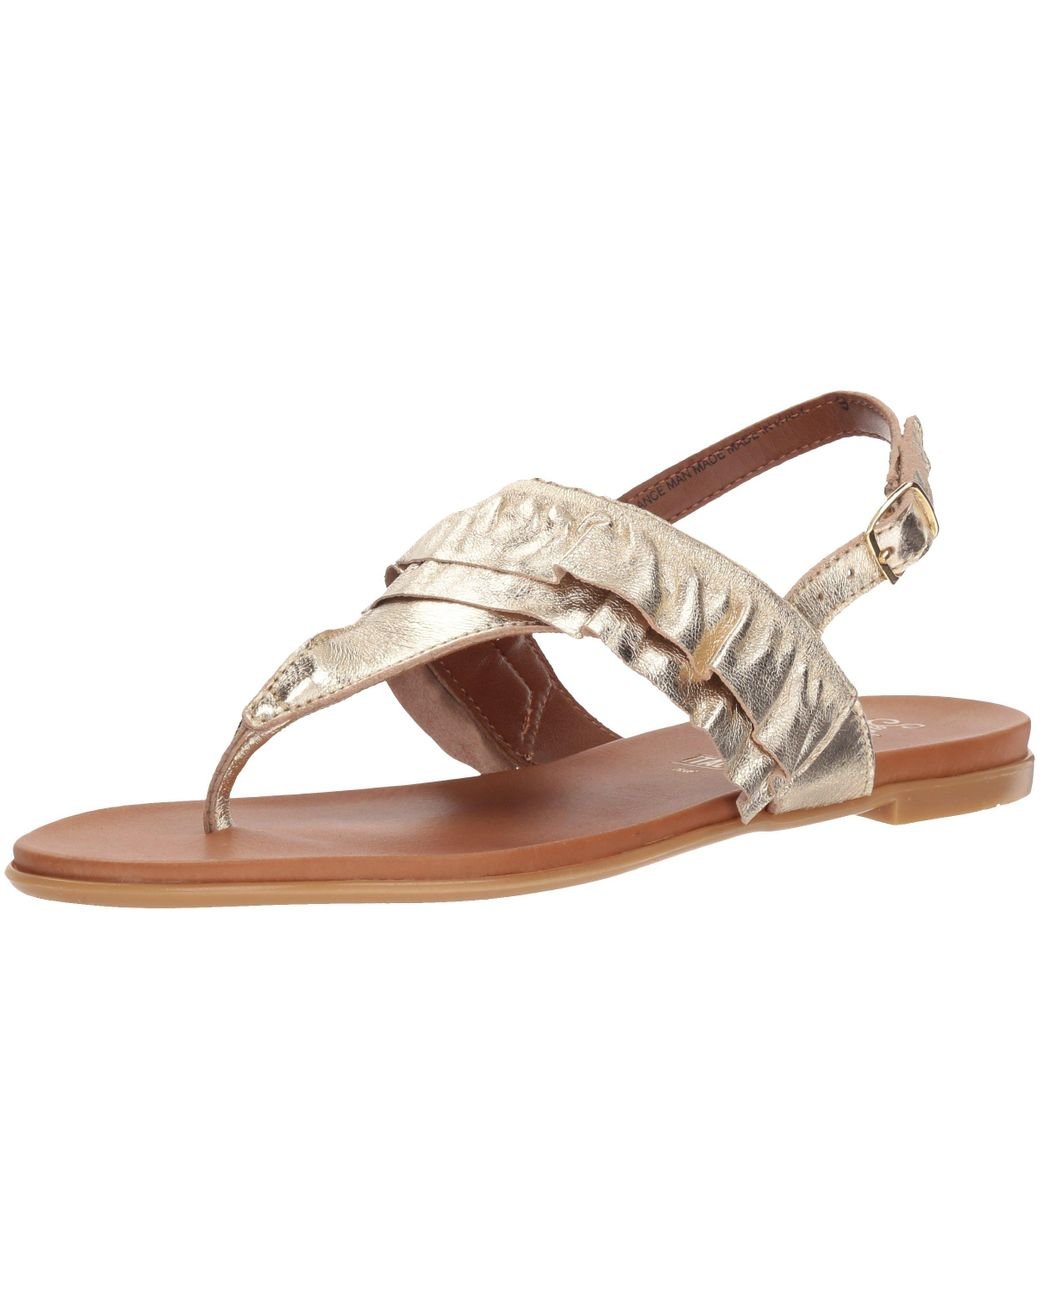 Seychelles Seclusion Sandal in Gold (Metallic) - Lyst